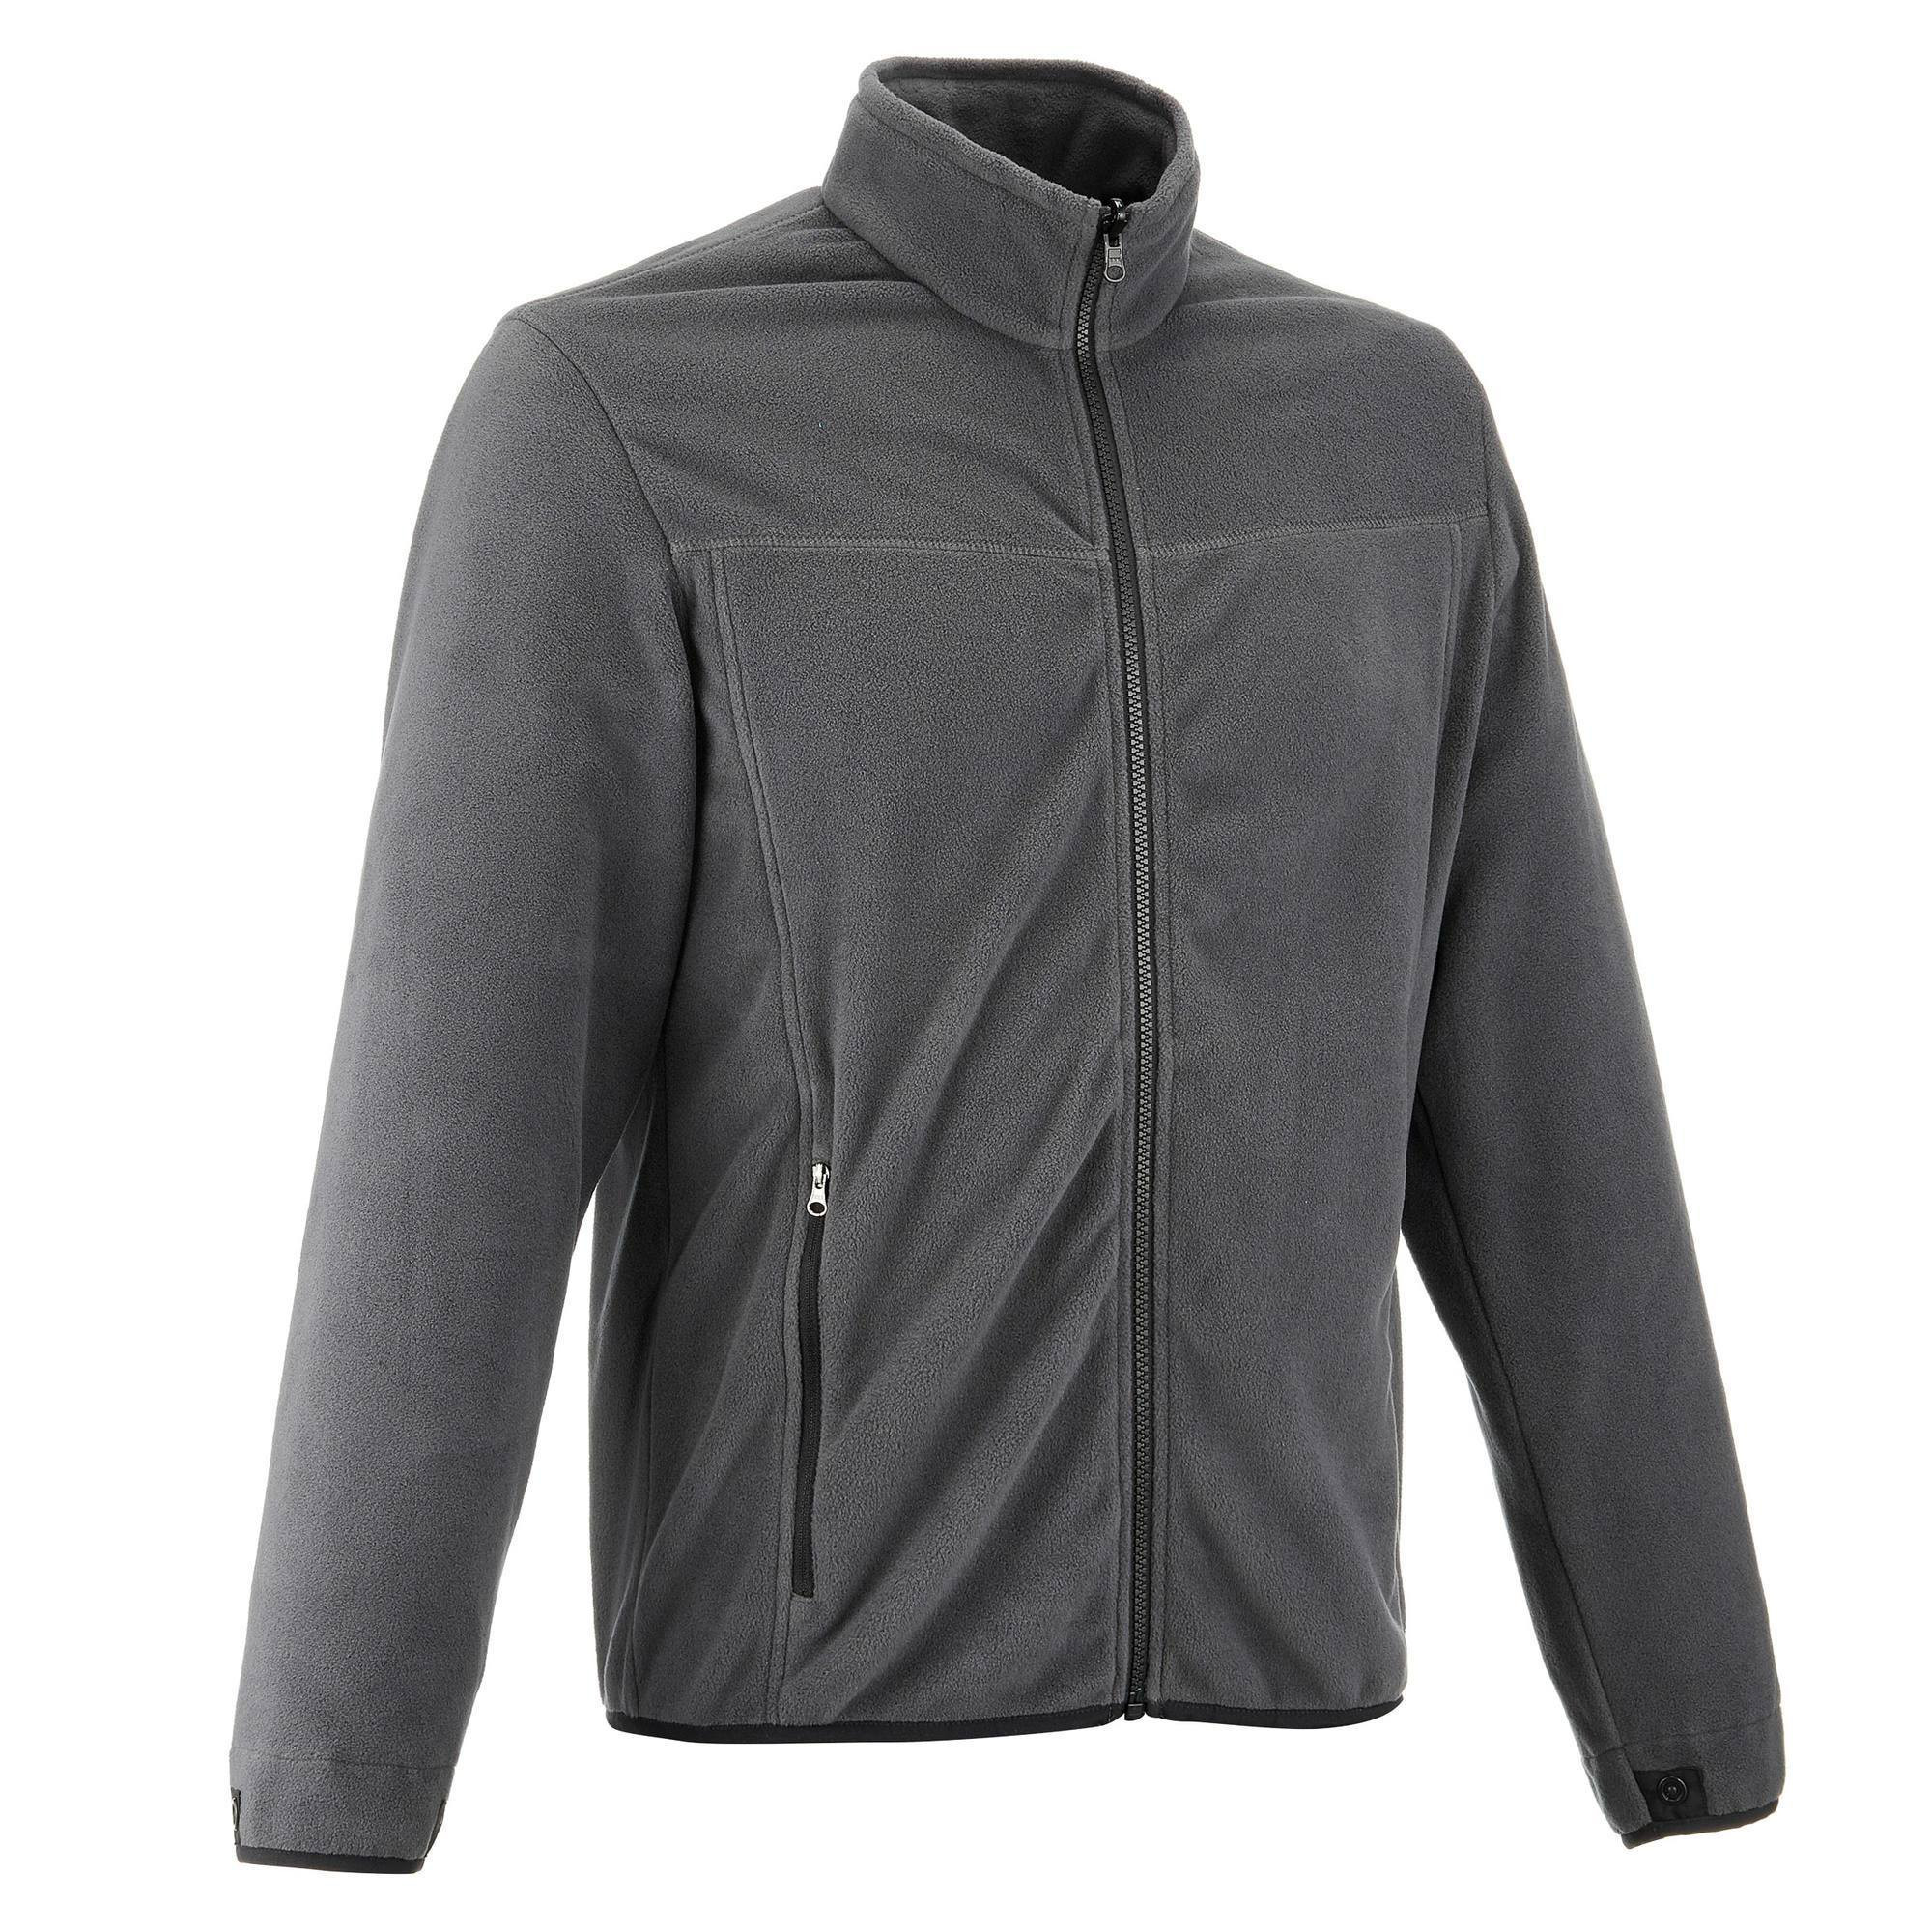 Best men's fleece jacket, as the temperature drops and the chill of winter sets in, there's no better feeling than bundling up in a cozy fleece jacket.